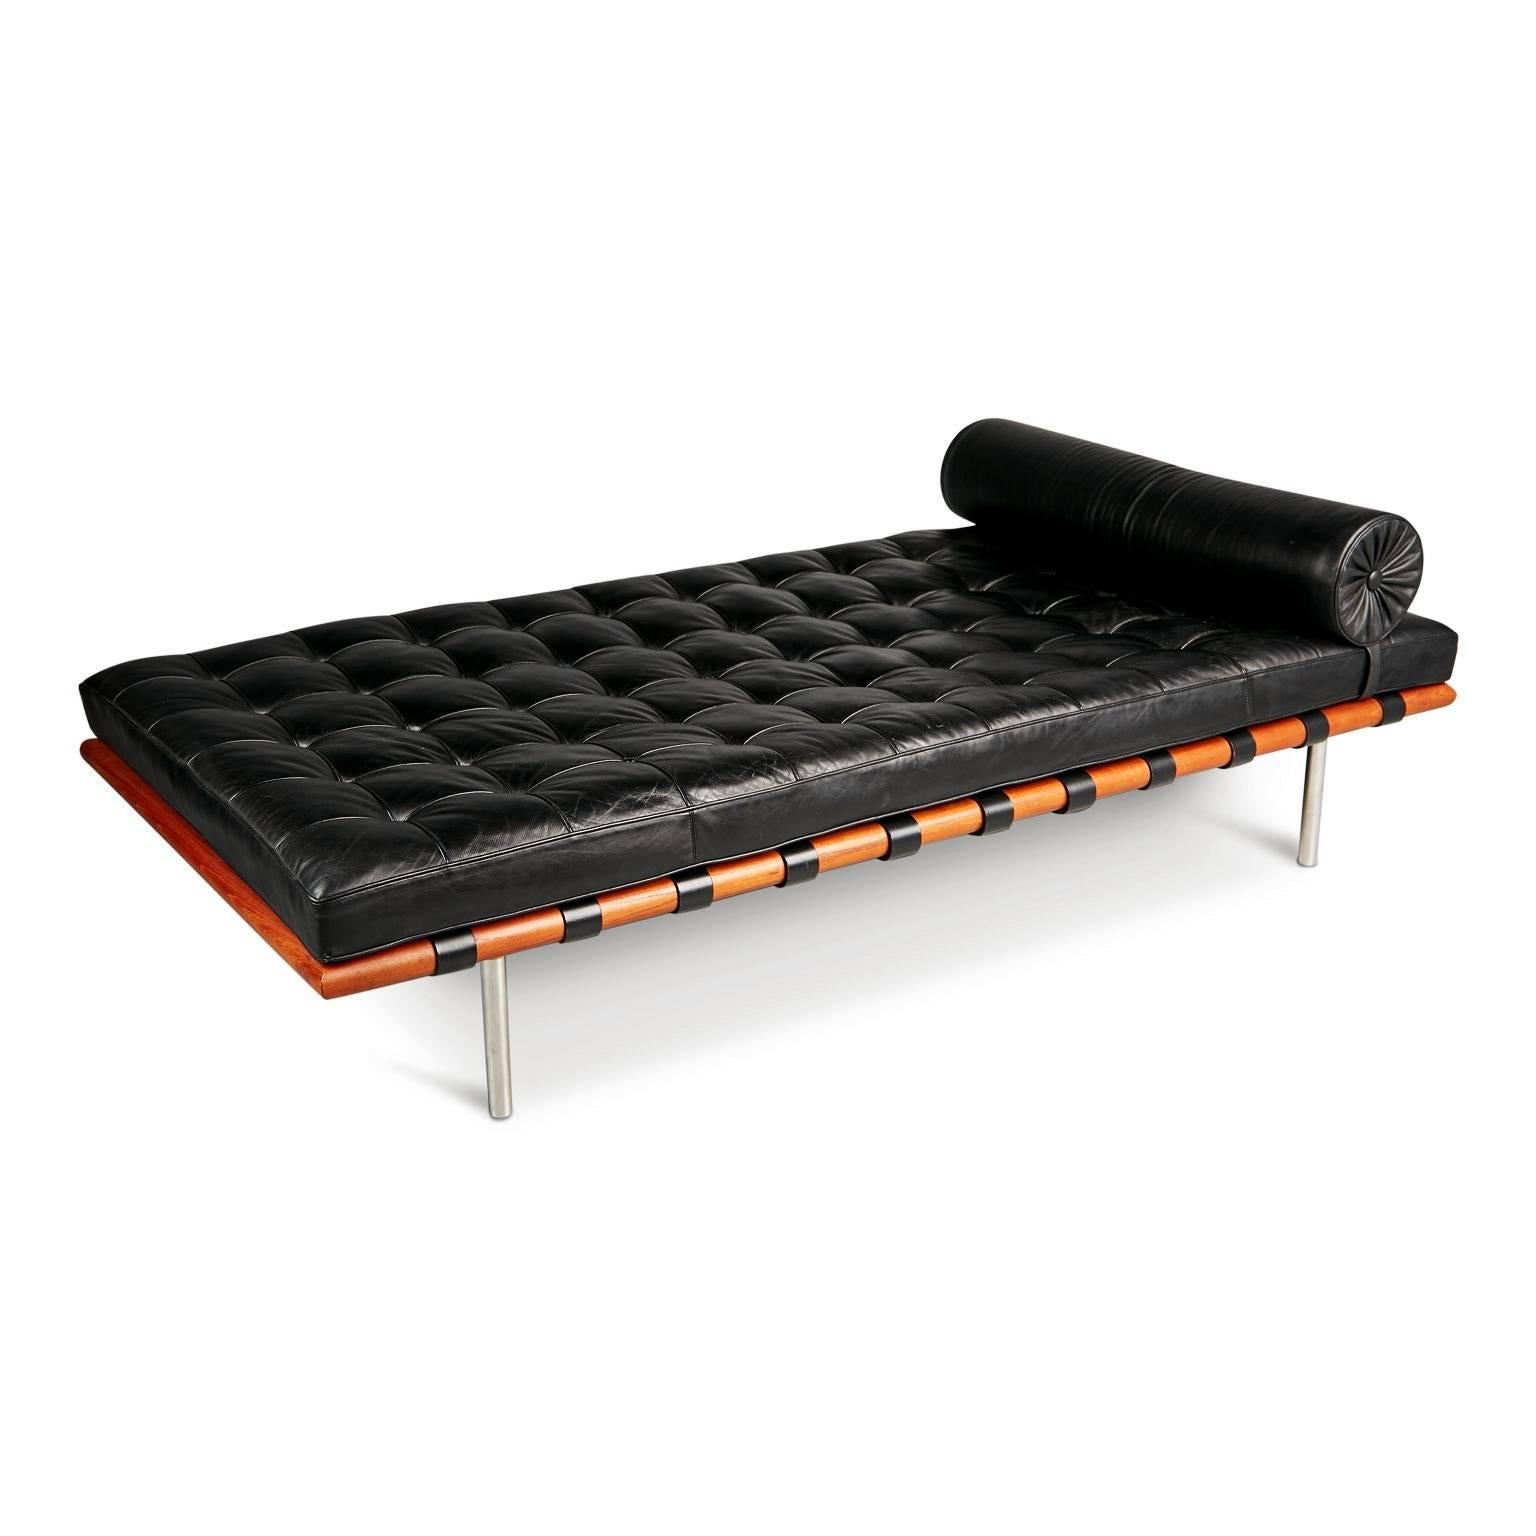 barcelona day bed